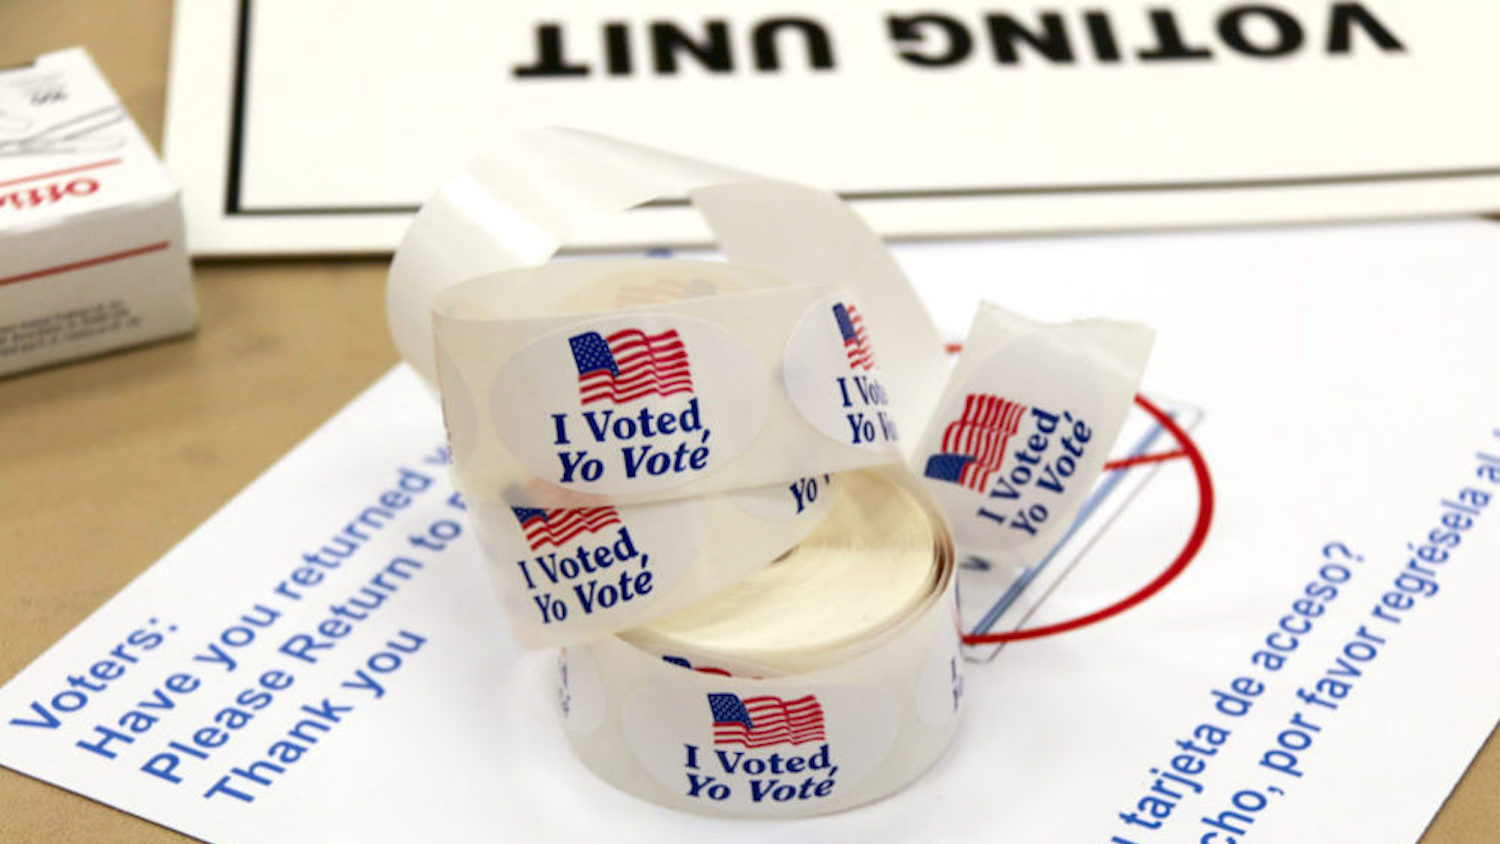 Fun Election Day Activities that Won't Stress You Out